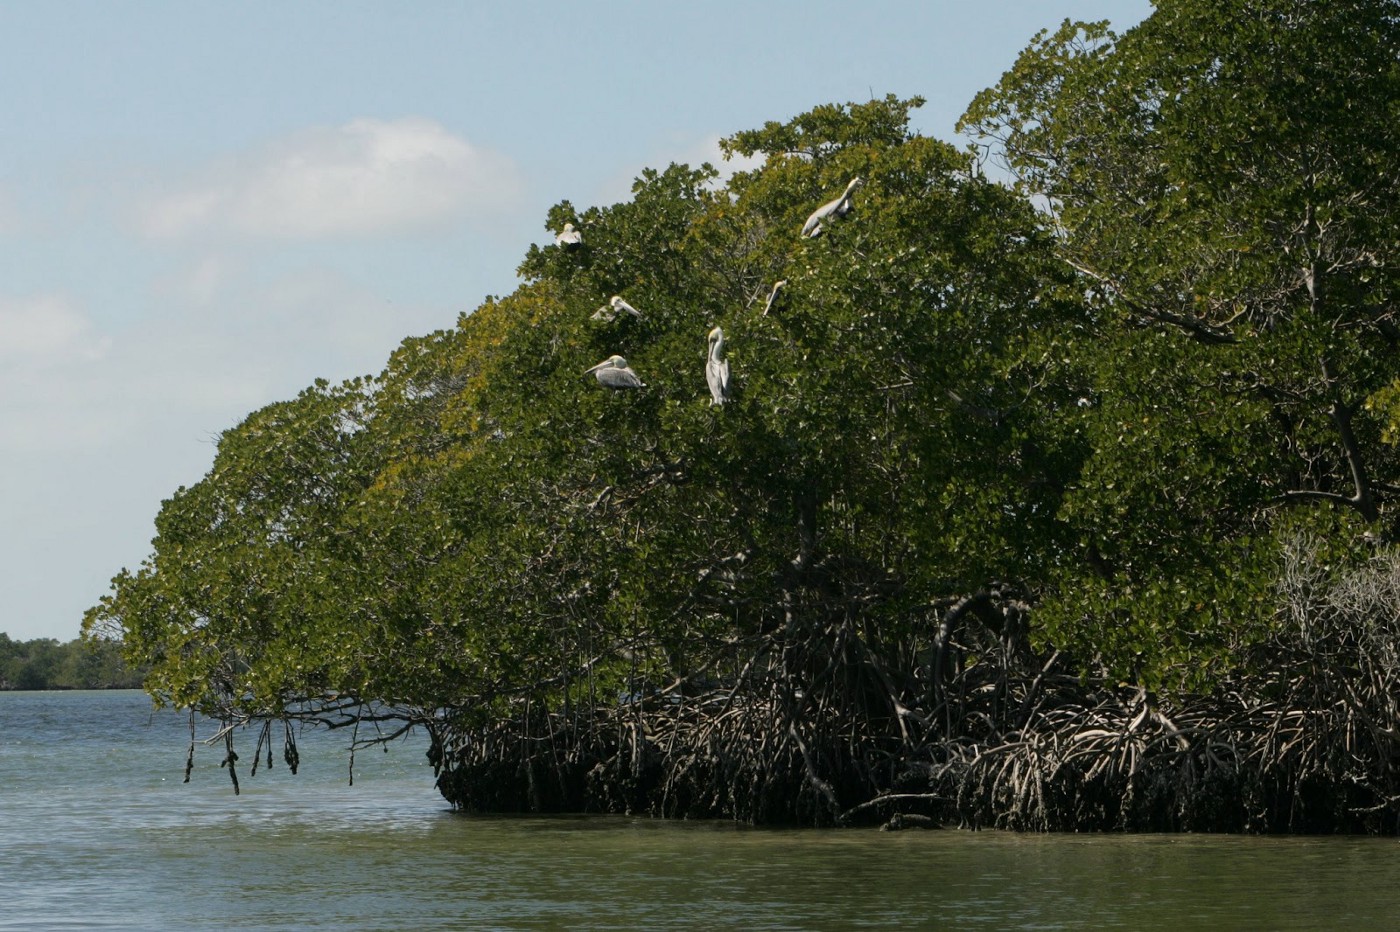 A group of storks perched in mangrove.